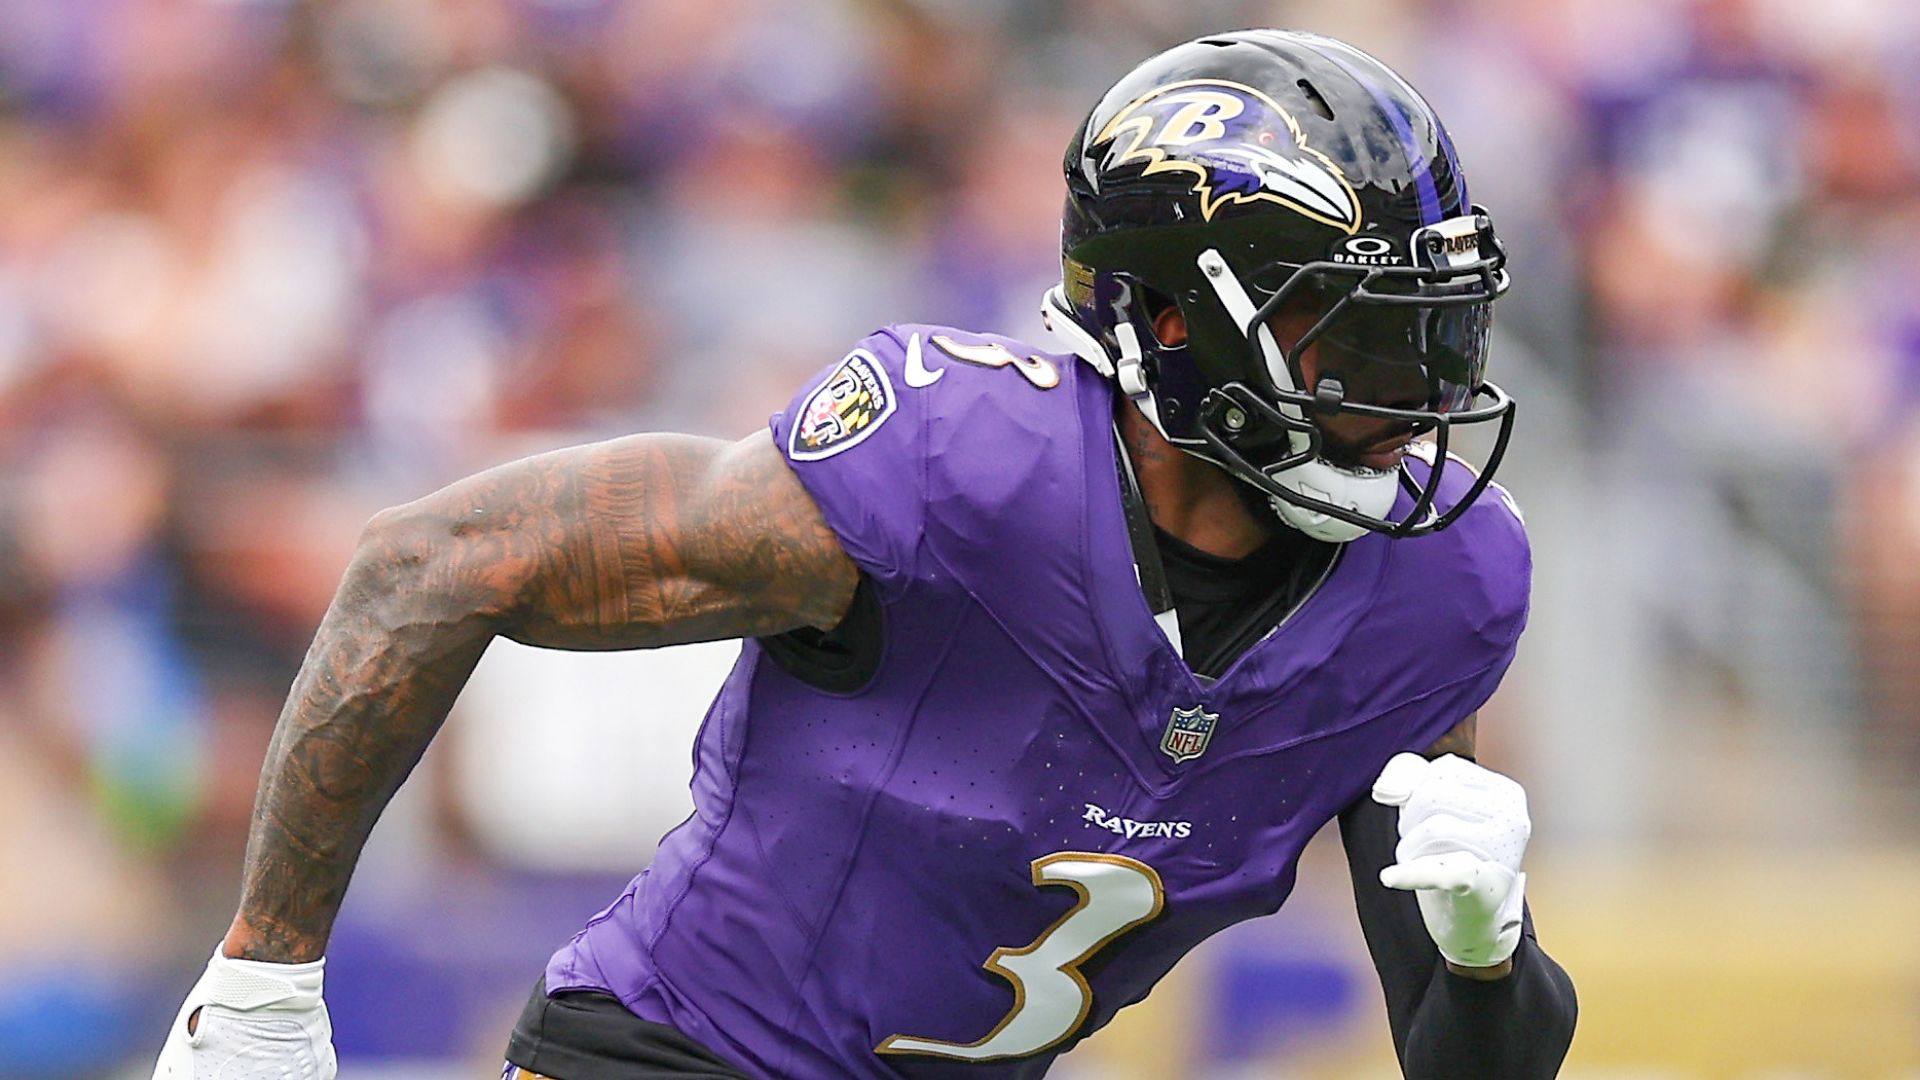 NFL Trade News: Which Baltimore Ravens Stars Could Be Surprise Cuts Due to Money Woes?